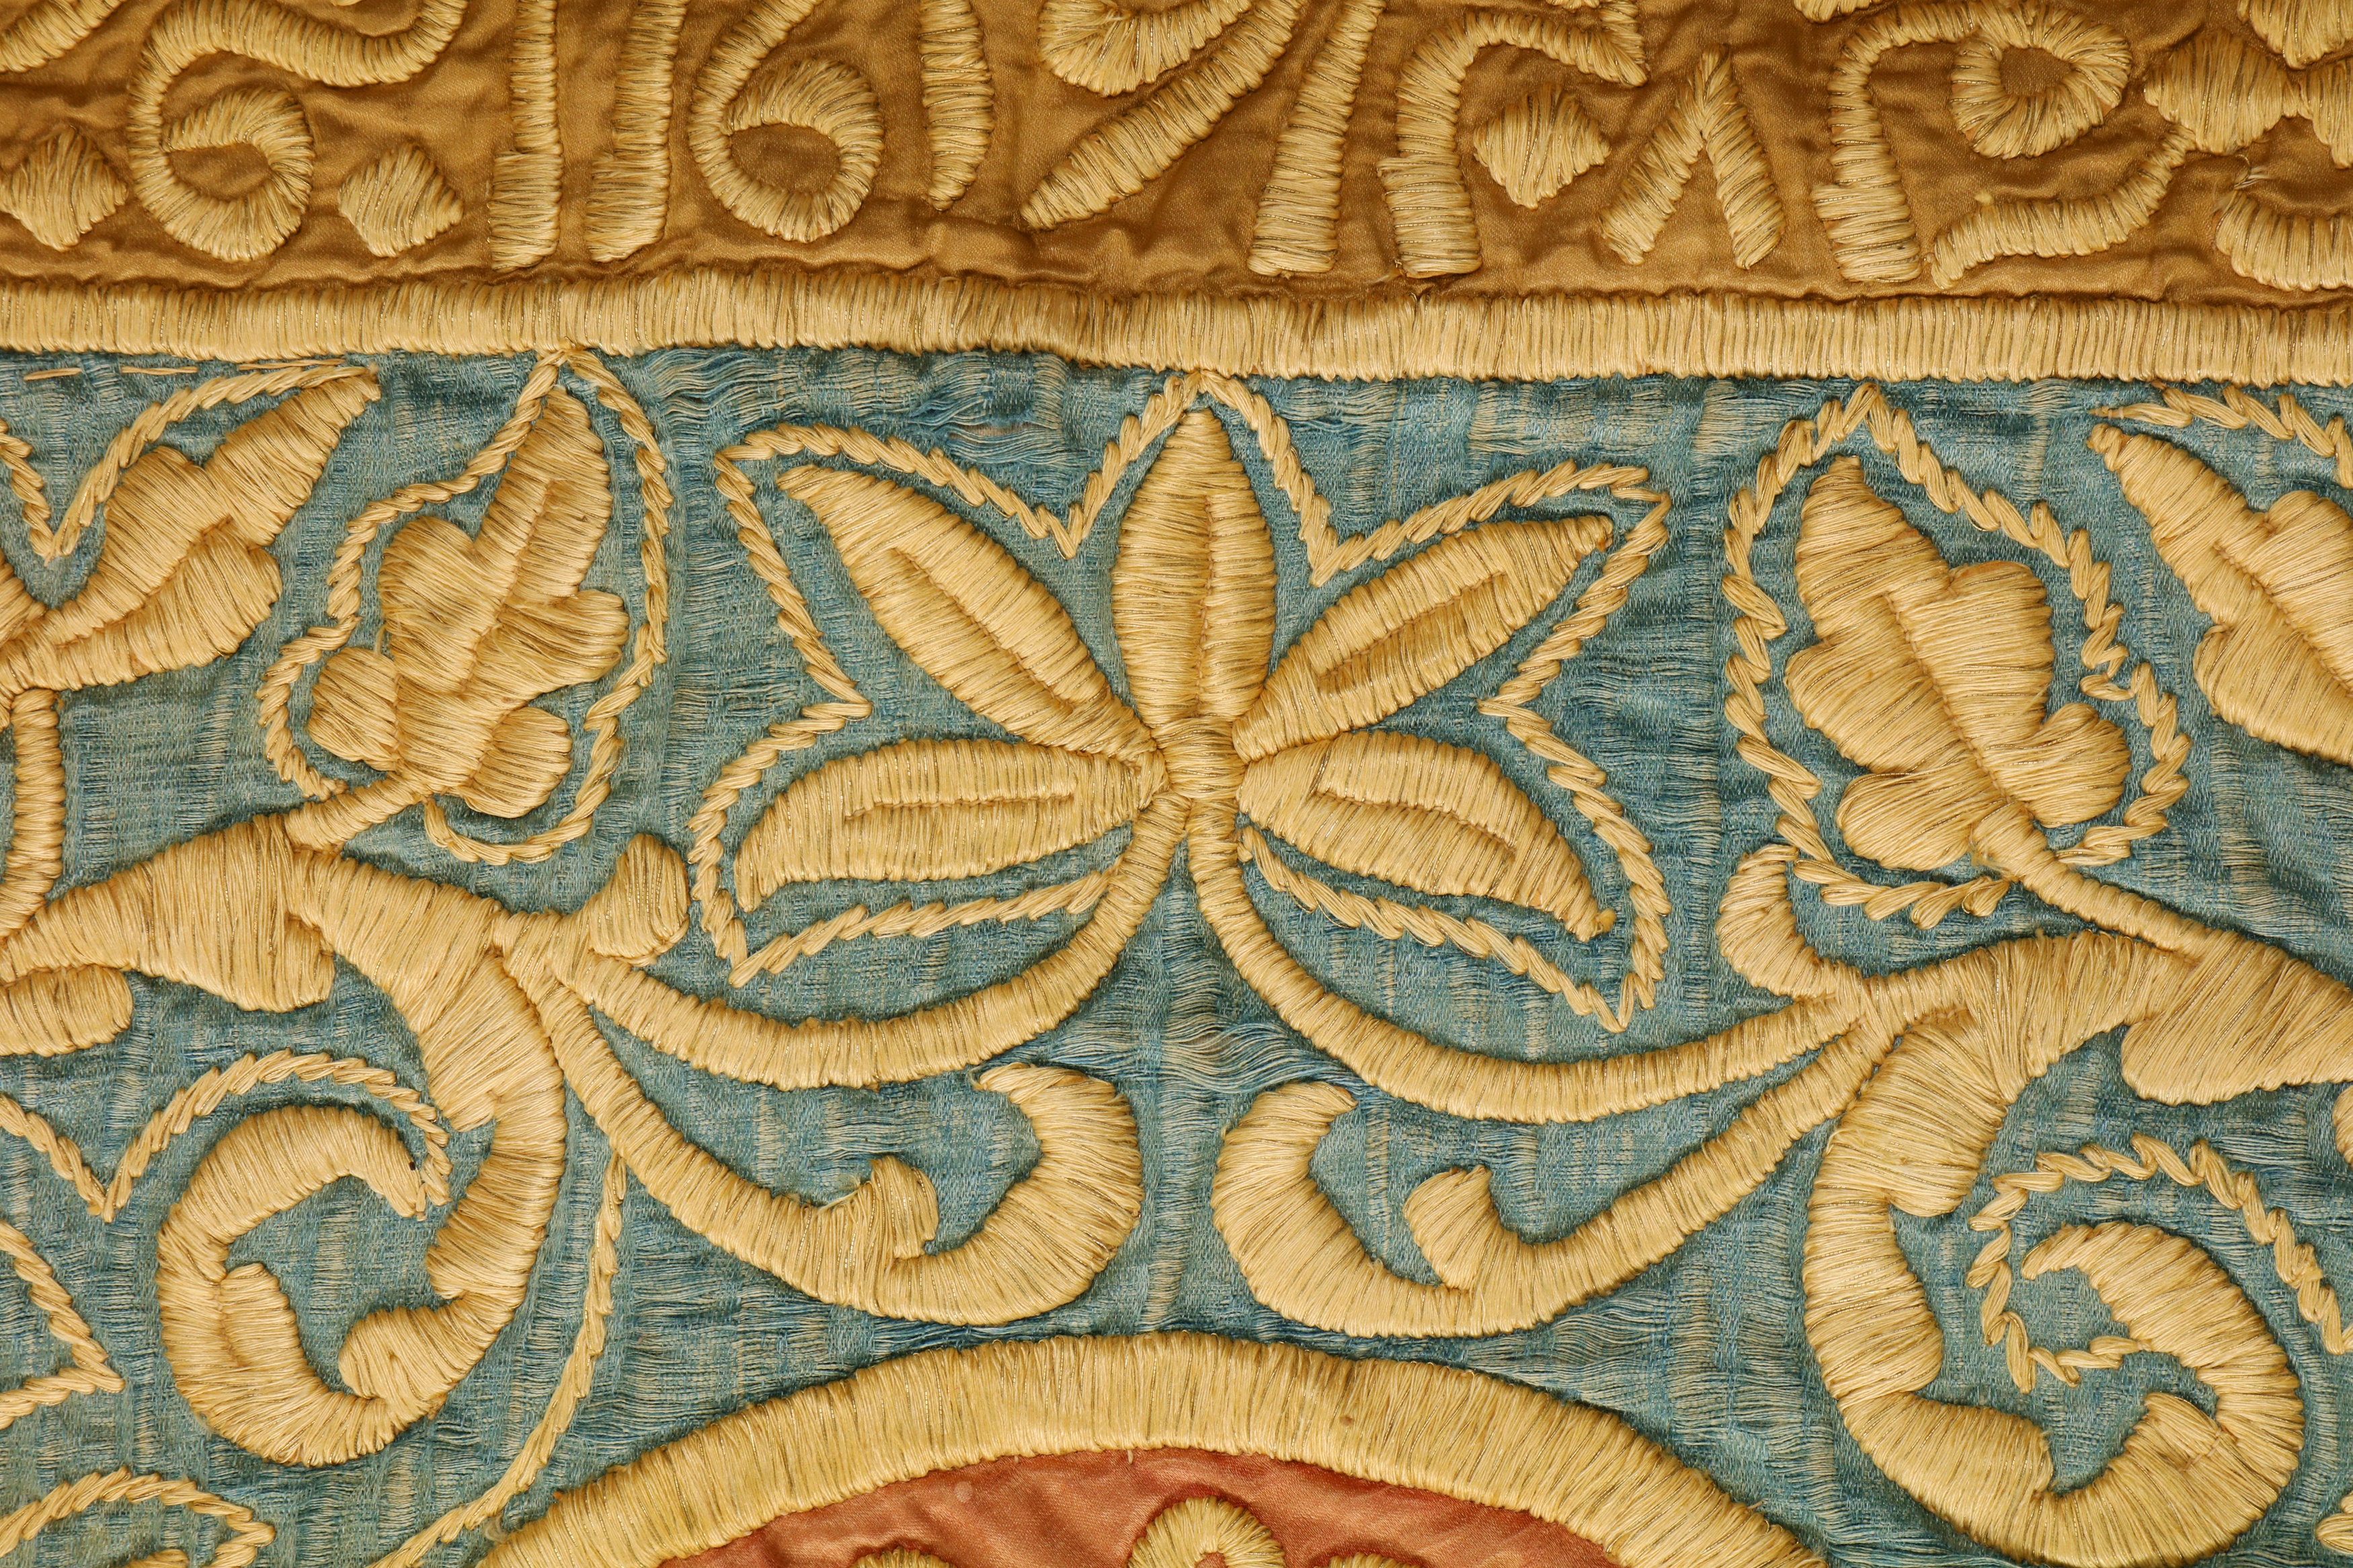 A LATE 19TH-EARLY 20TH CENTURY MOROCCAN EMBROIDERED CALLIGRAPHIC WALL HANGING - Image 5 of 6